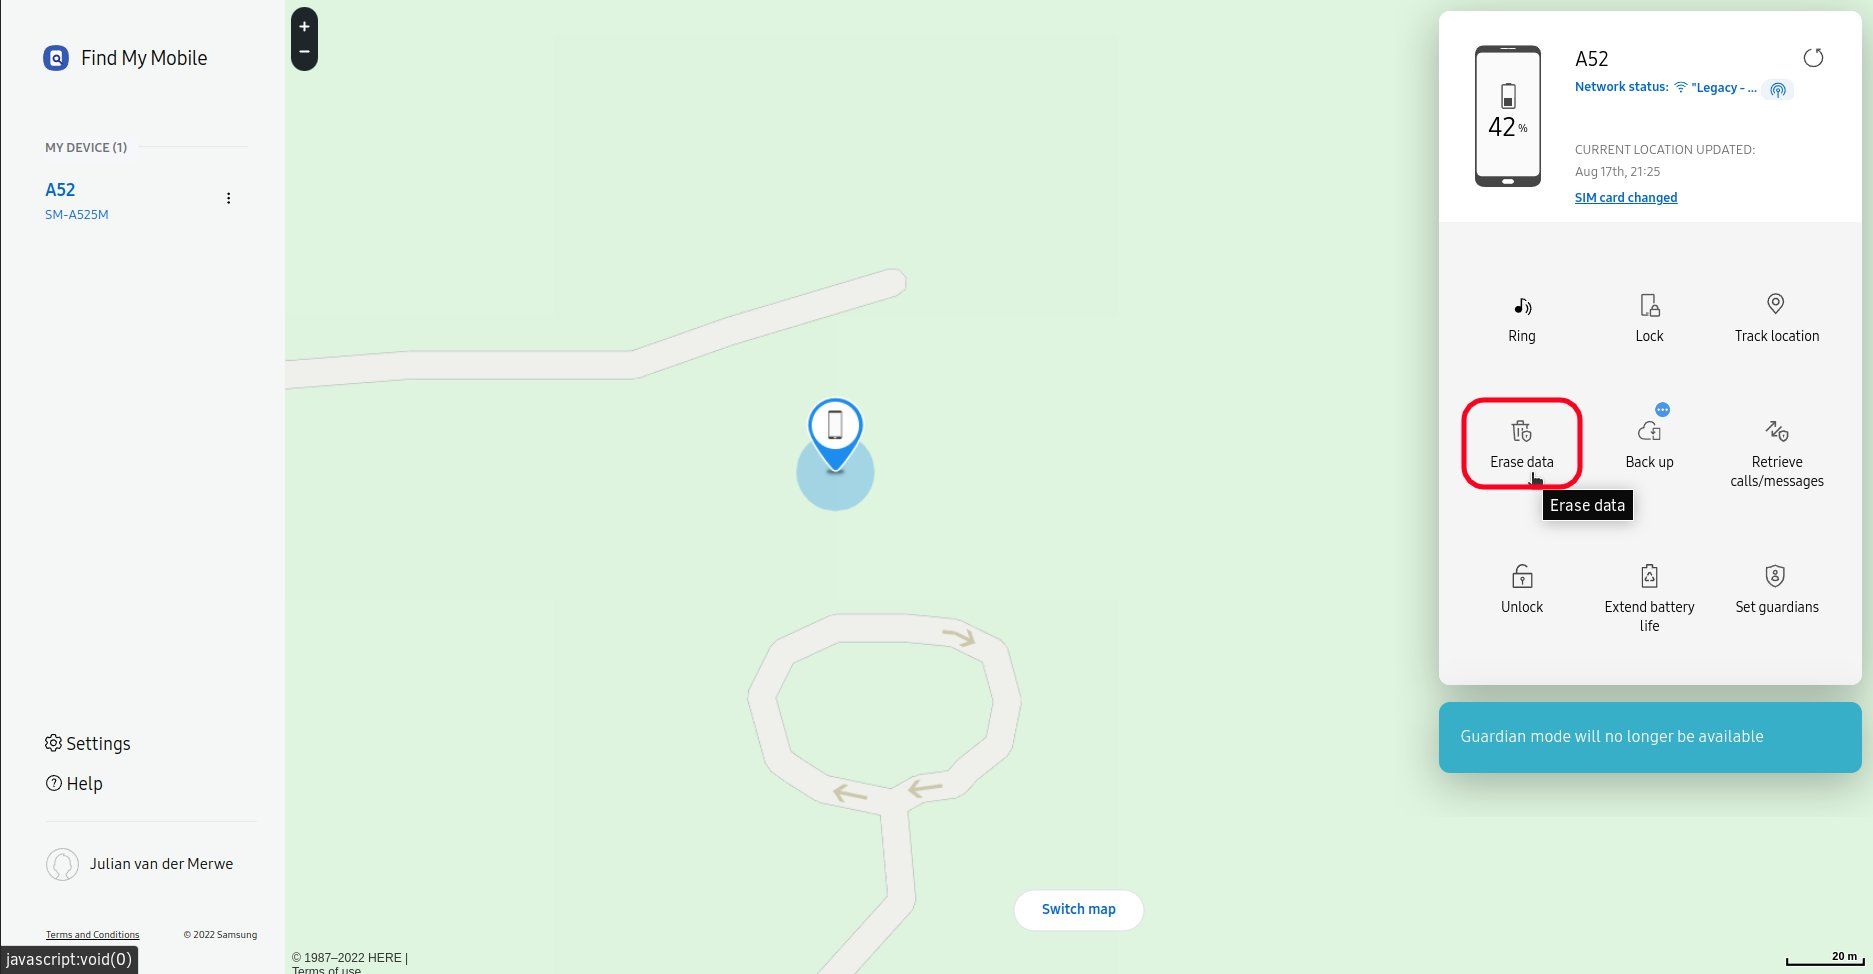 The find my mobile page is open with the erase data button highlighted.